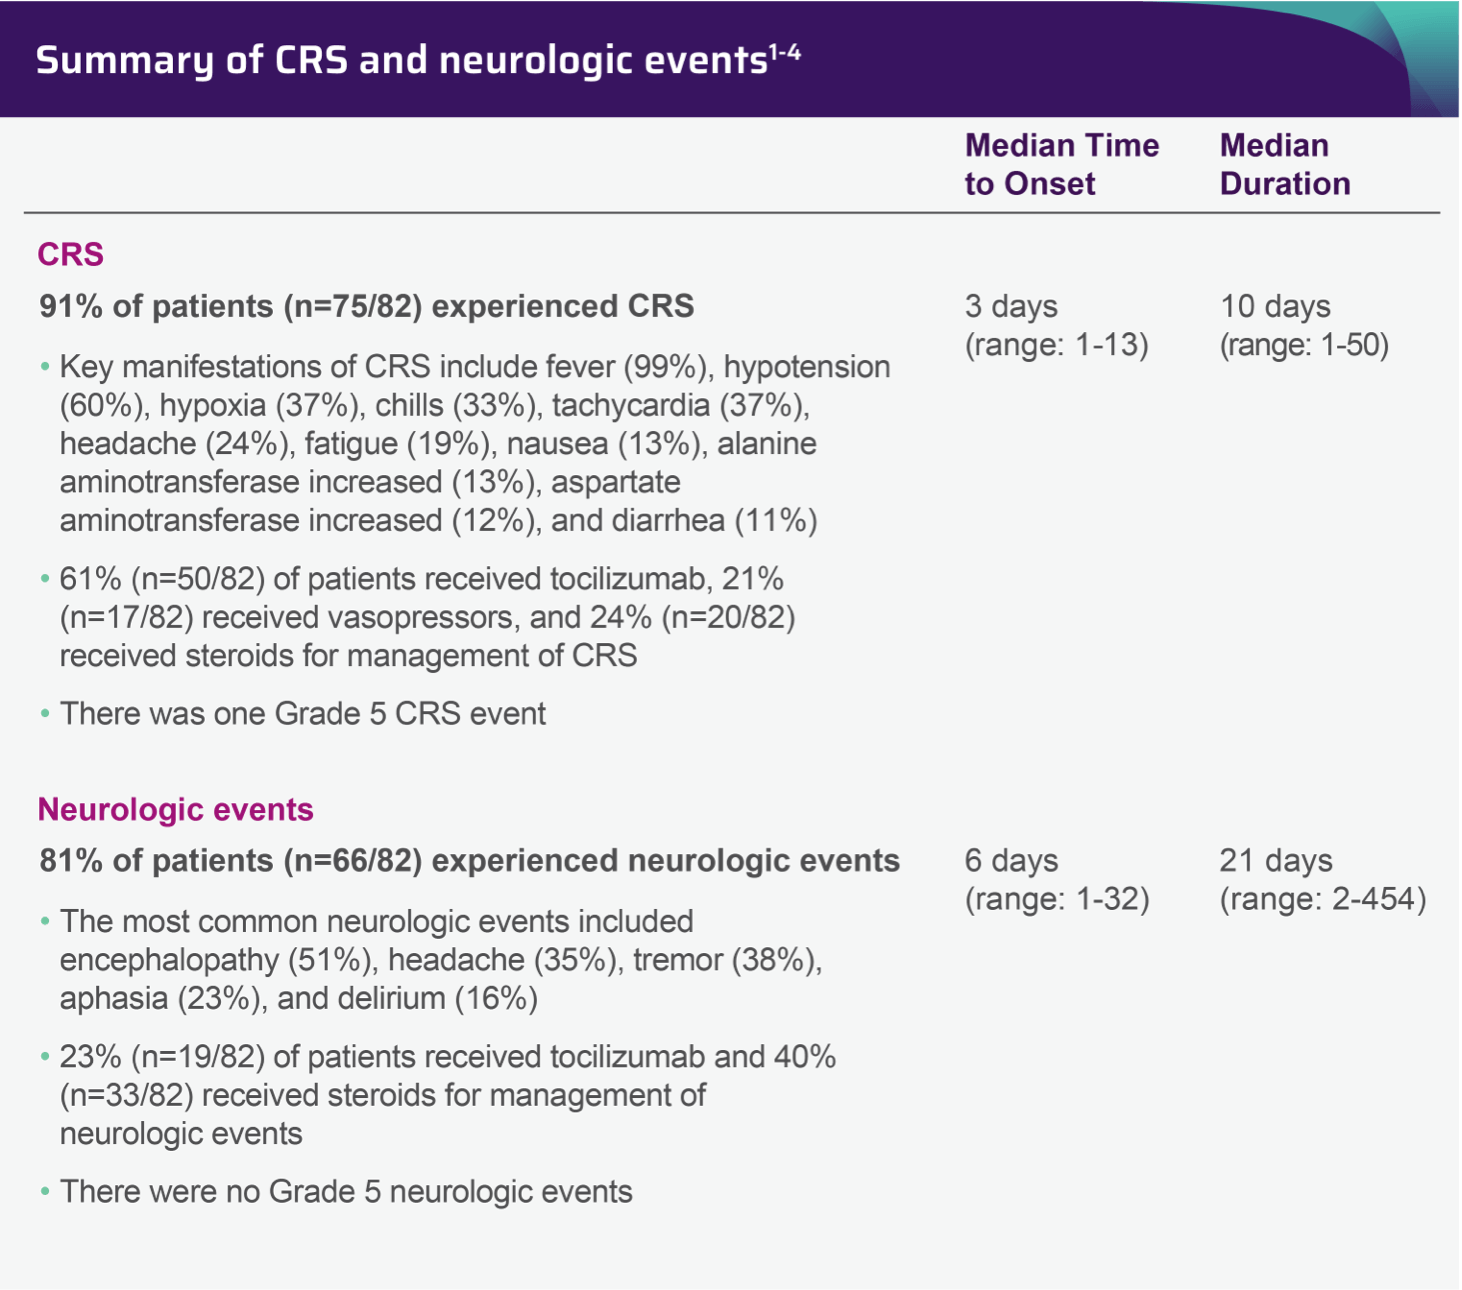 Table showing summary of CRS and neurologic events